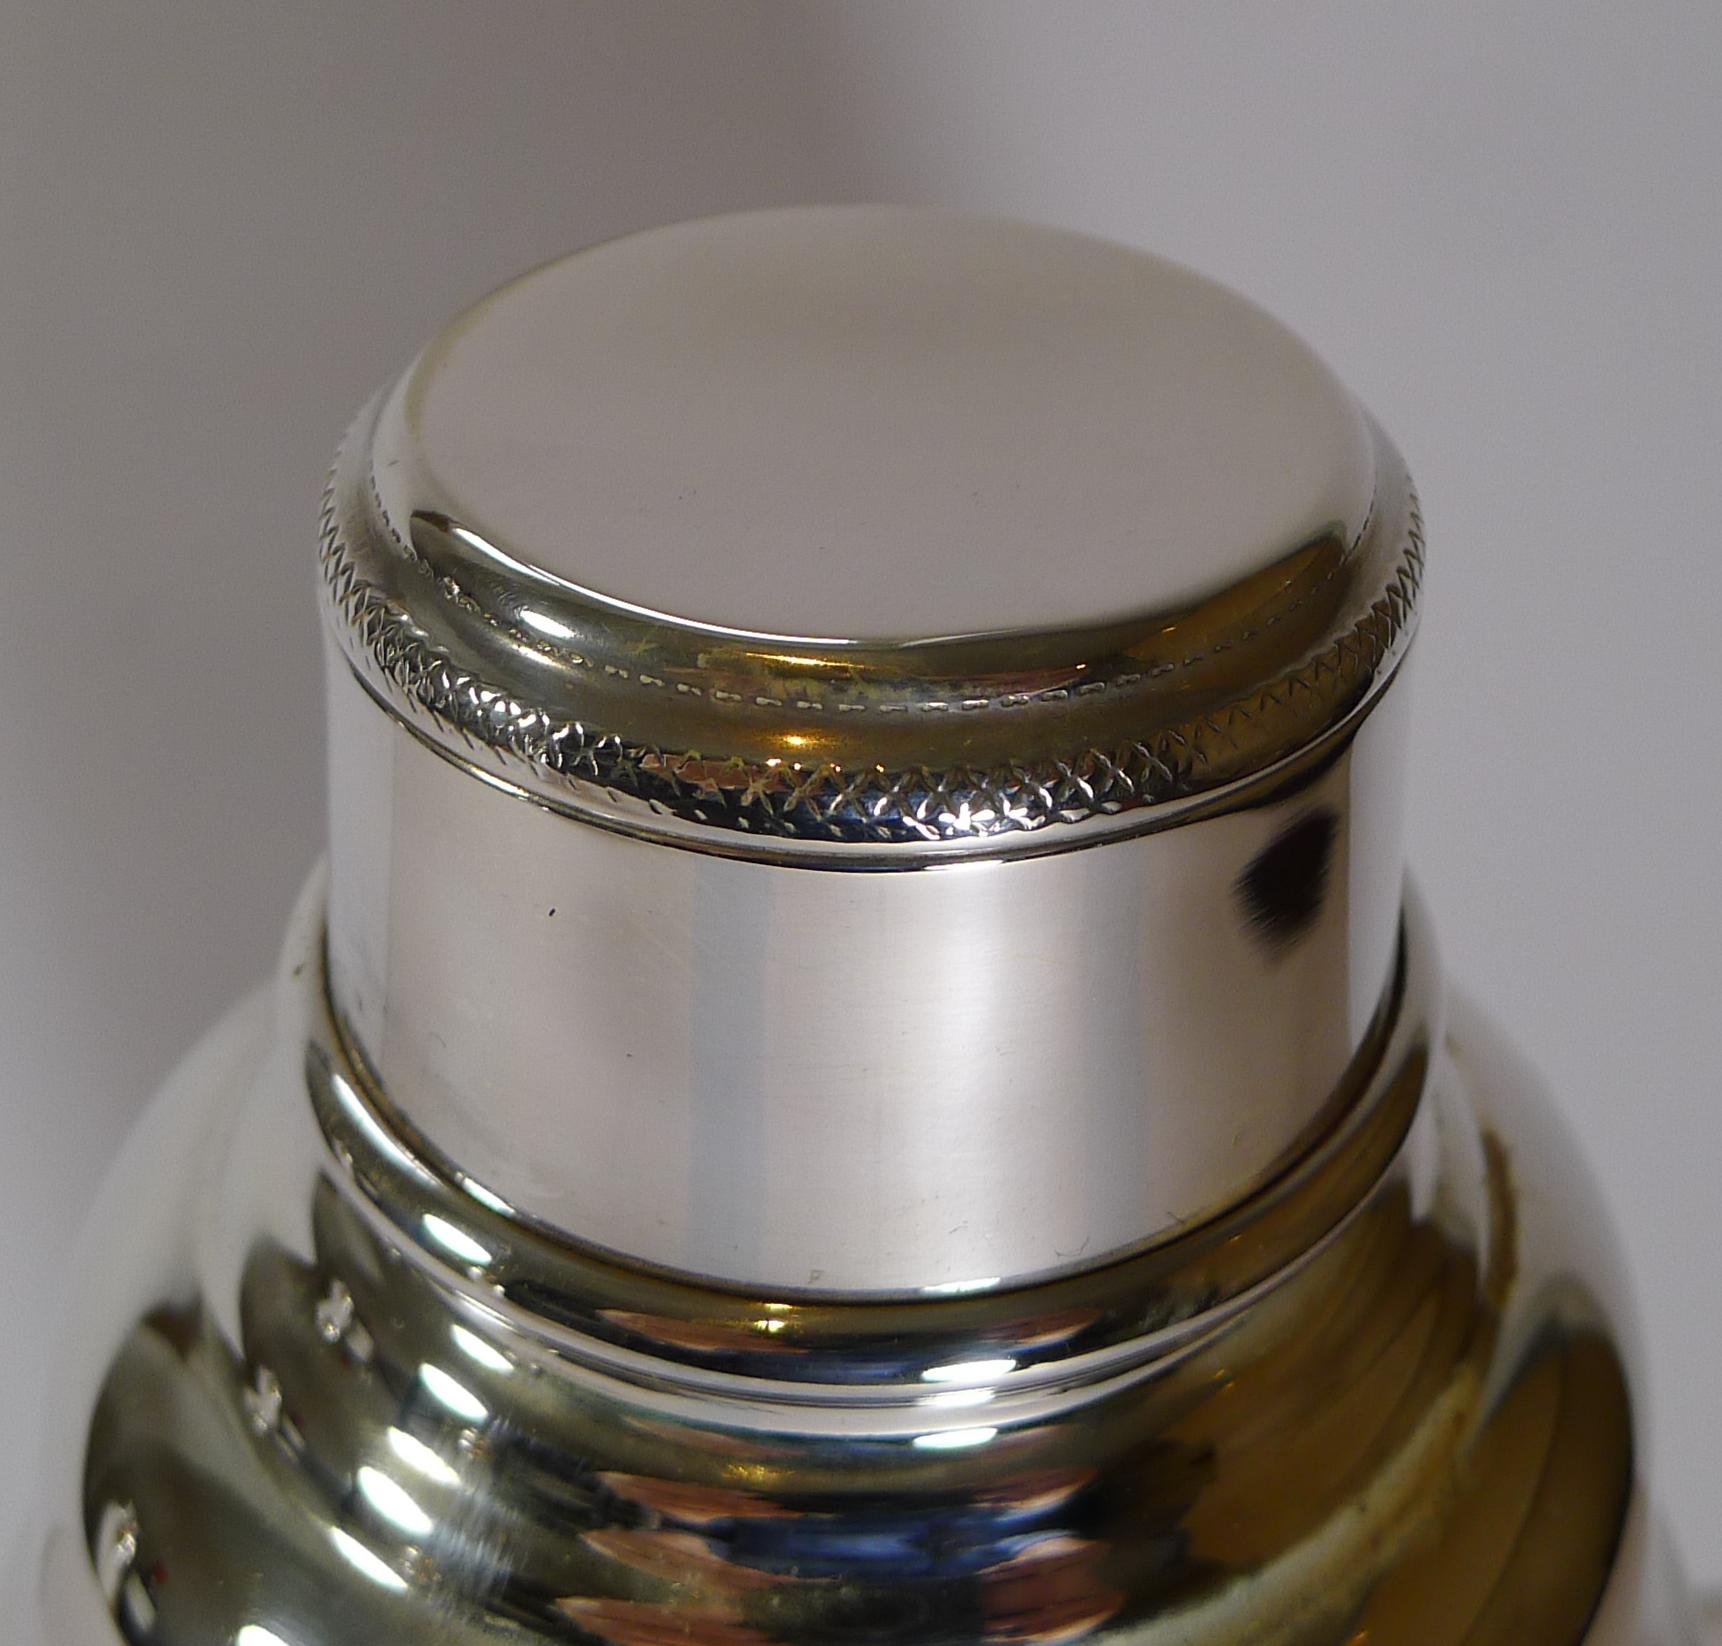 A good sized silver plated cocktail shaker by the highly collectable silversmith, Hukin and Heath.

Just back from our silversmith's workshop where it has been professionally cleaned and polished, restoring it to it's former glory.

Art Deco in